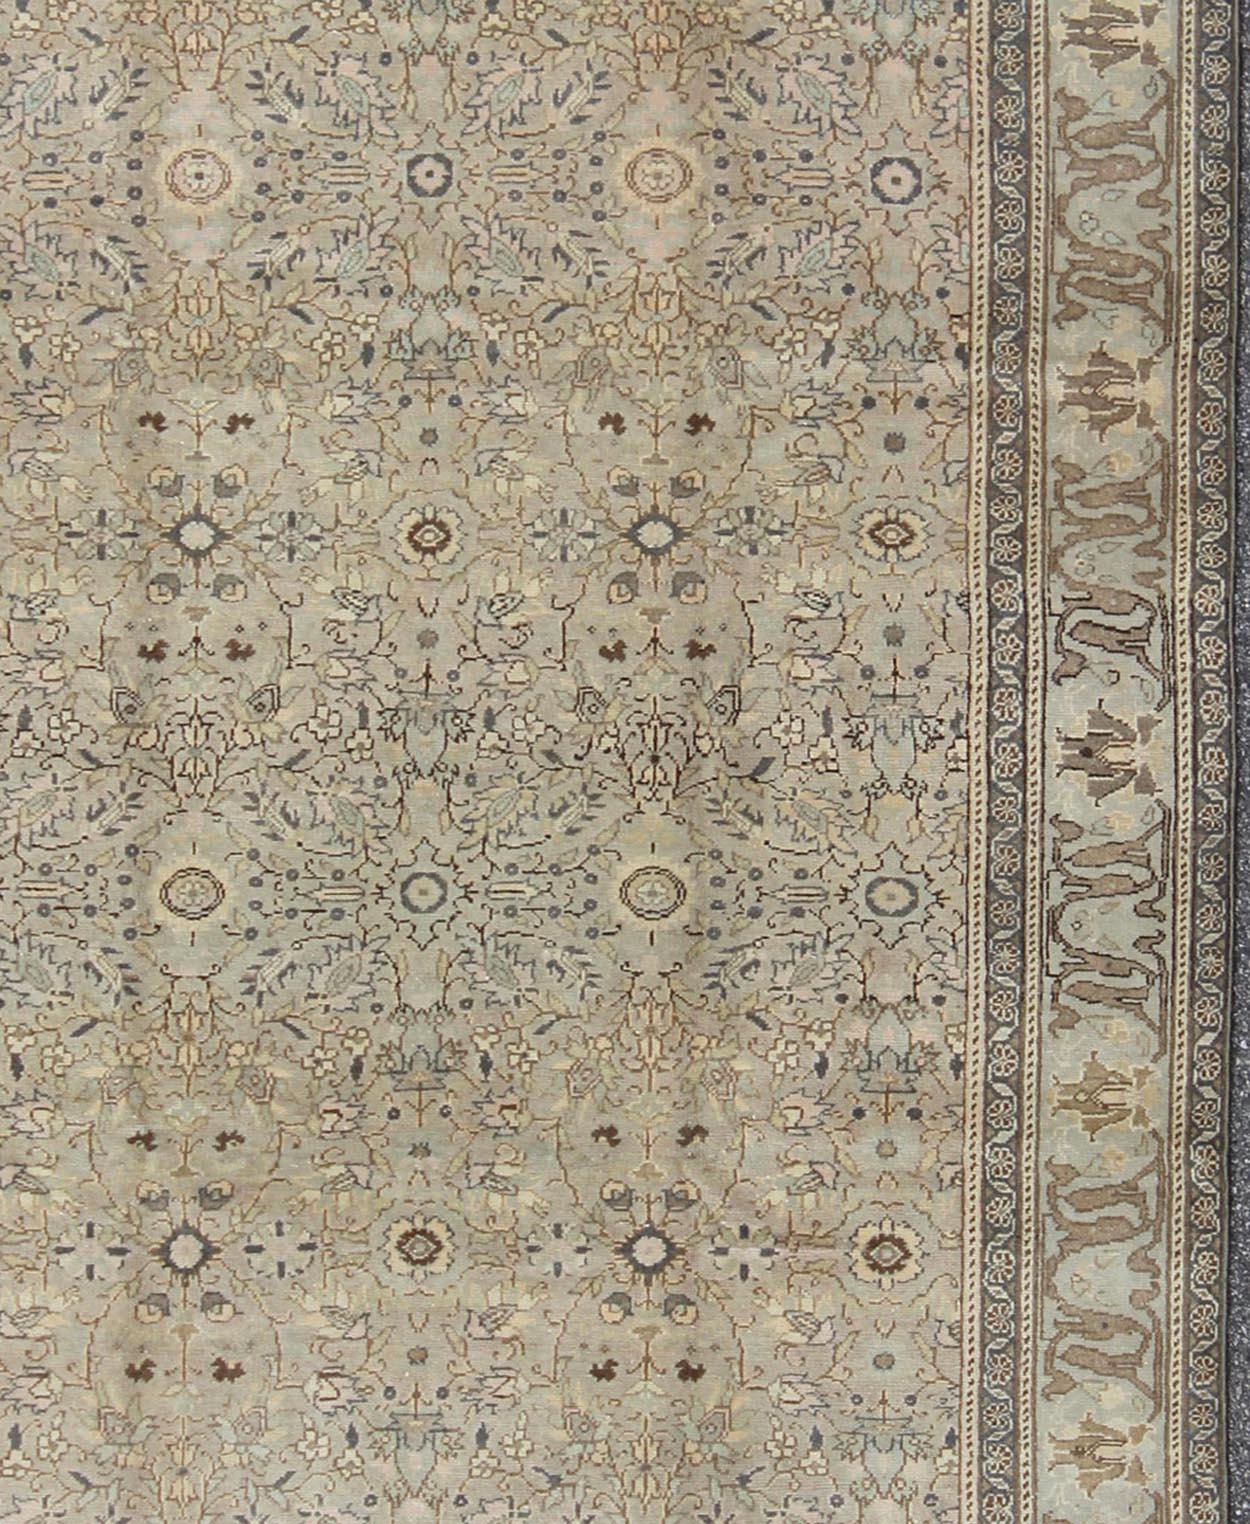 Oushak Vintage Turkish Sivas Rug with Floral Design in Earthy Neutrals  For Sale